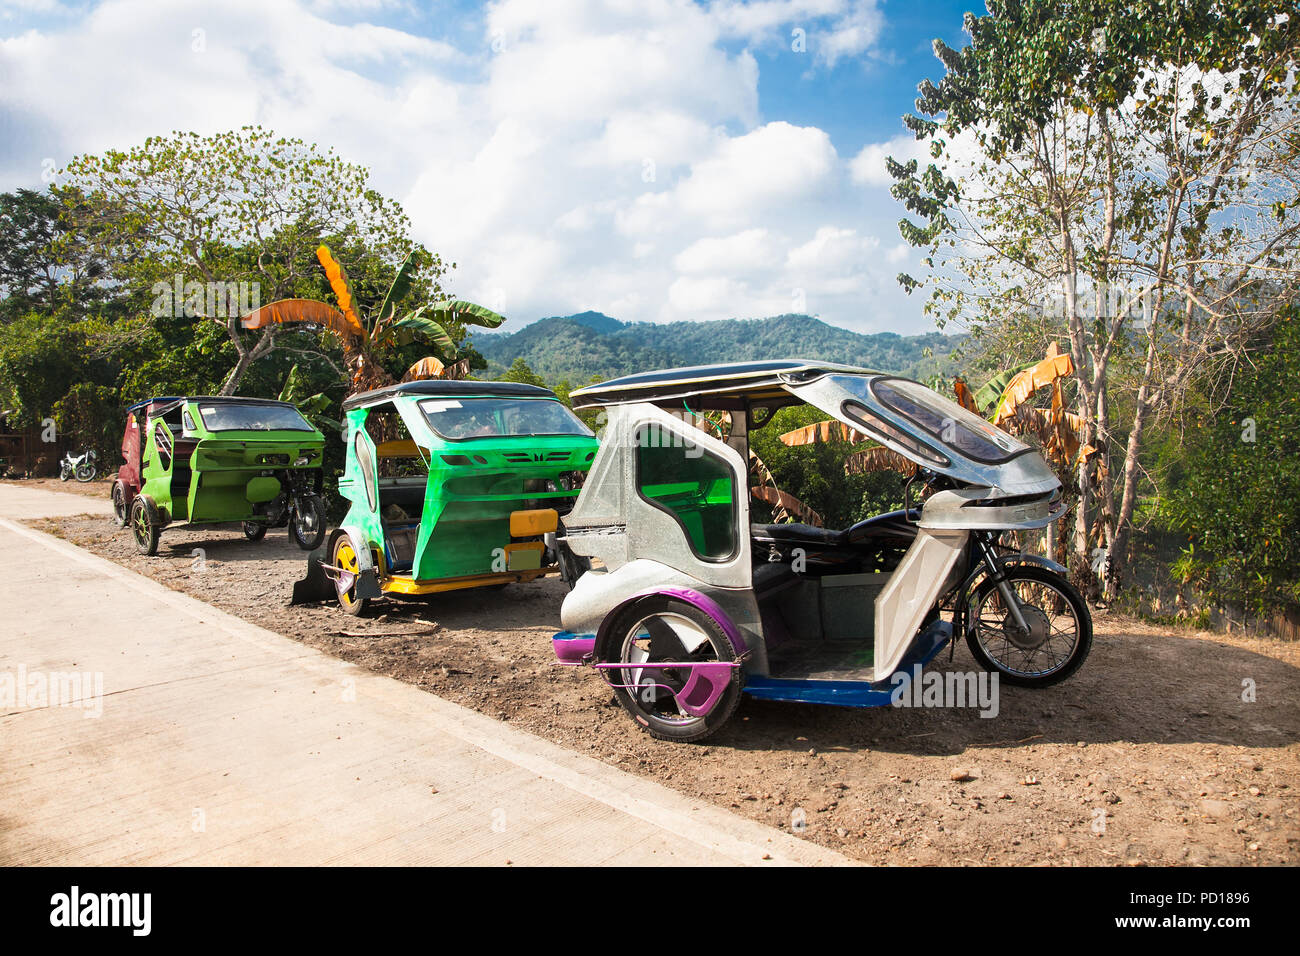 PALAWAN, PHILIPPINES- MARCH 28, 2106: Bontoc is a motorized home made tricycle and used as a local transport to Palawan island on March 28, 2016, Phil Stock Photo